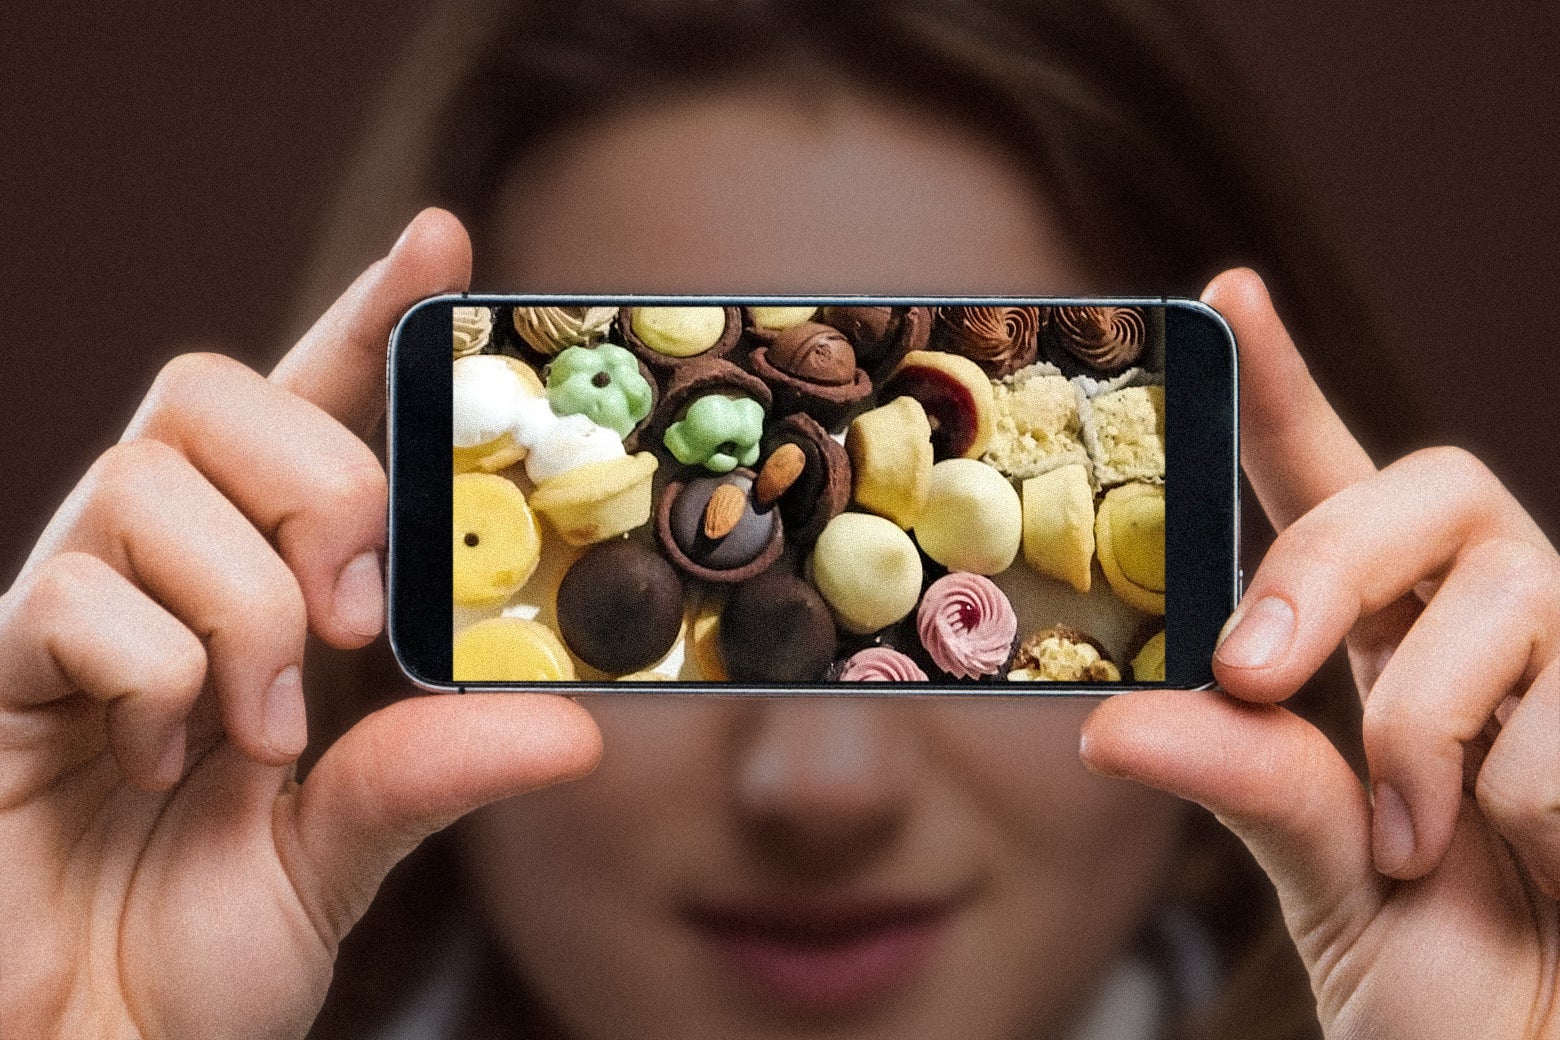 A young woman holds an iPhone horizontally in front of her face, with the screen facing the camera. On the phone screen is a photo of small pastries and a mix of bite-sized tarts in different flavors, with brown, green, pink, and white frosting. The phone is blocking the woman's eyes, but she has a slight smile and appears happy. 